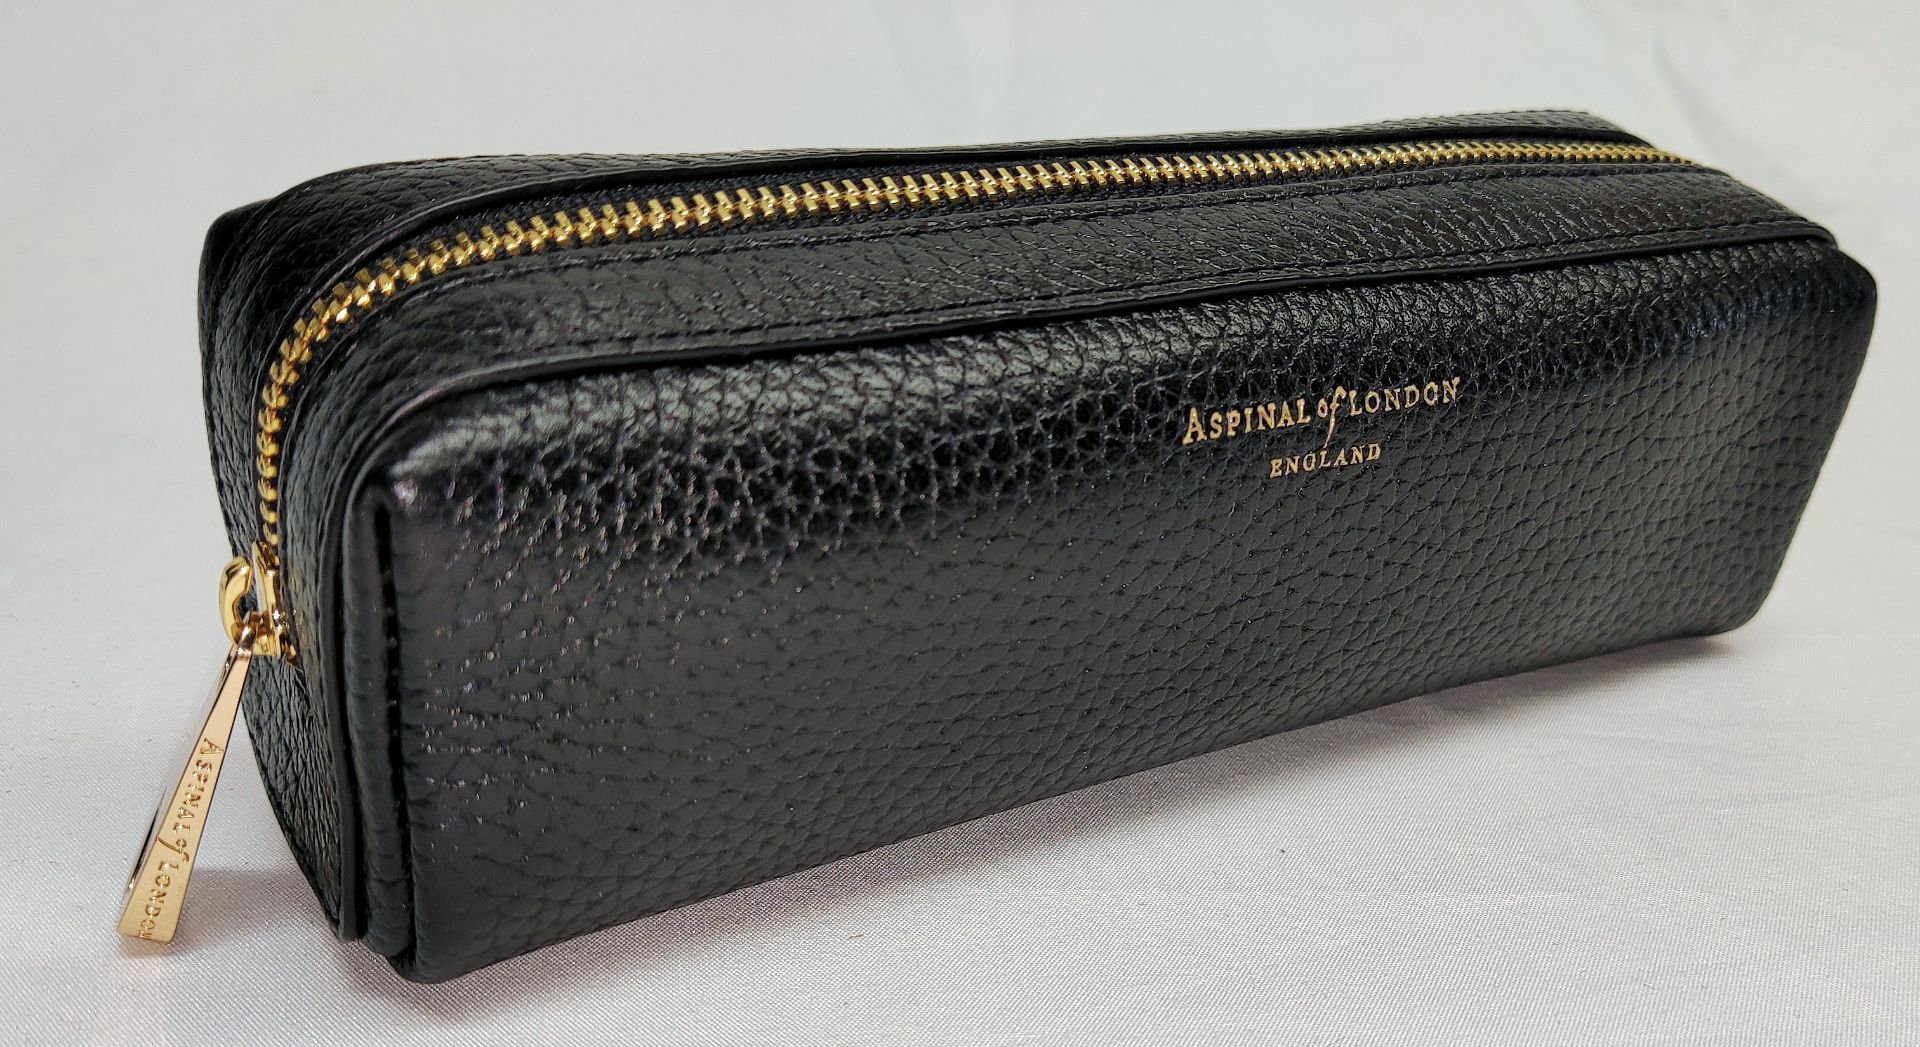 1 x ASPINAL OF LONDON Small London Case In Black Pebble - Boxed - Original RRP £75 - Ref: 6852686/ - Image 5 of 14